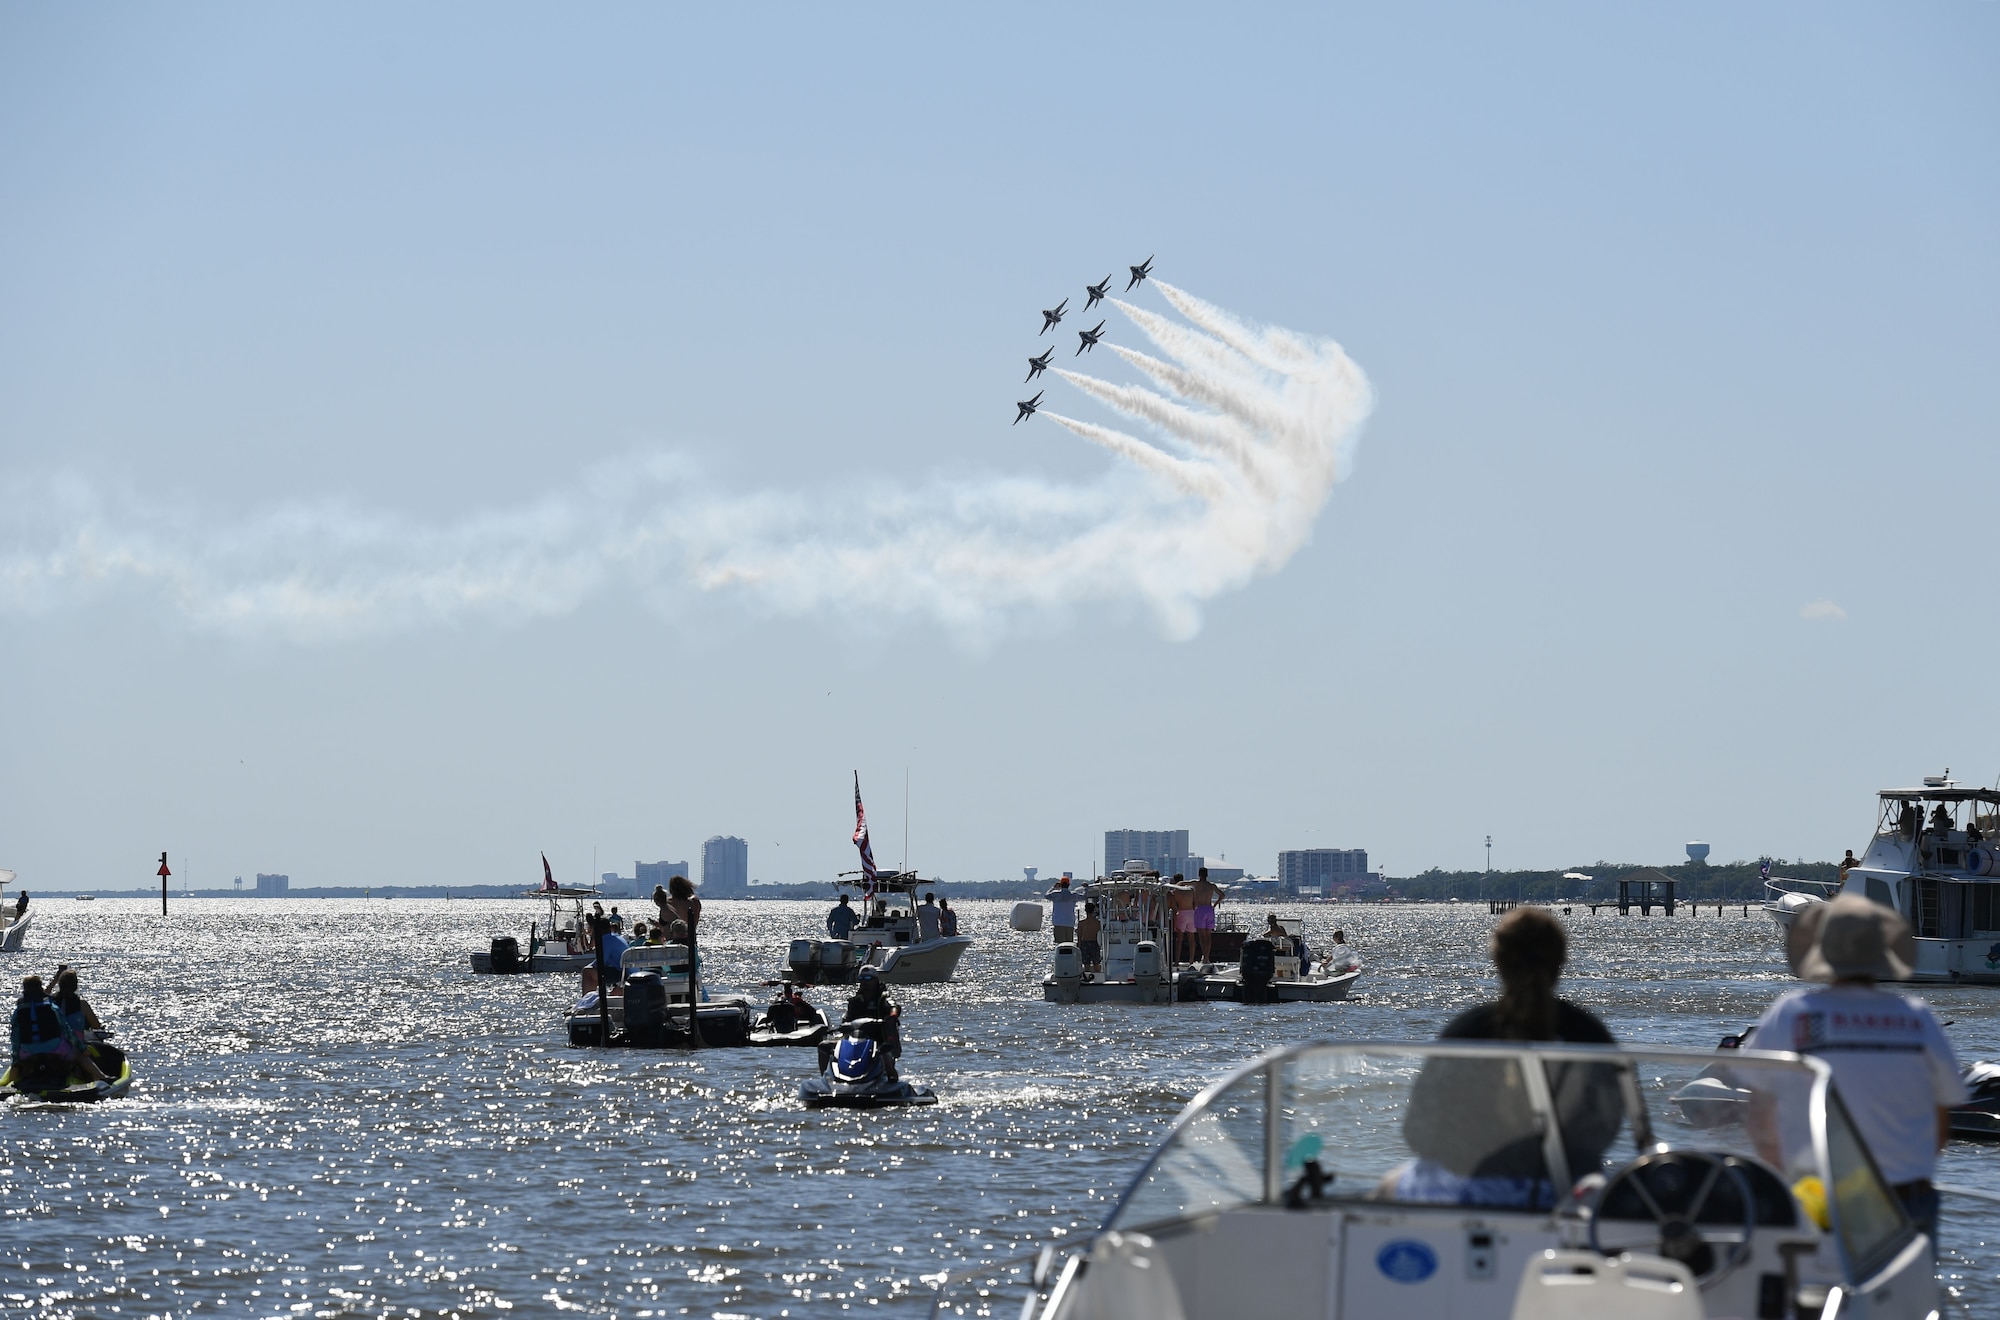 The Thunderbirds fly over Biloxi Beach during the 2023 Thunder Over the Sound Air and Space Show in Biloxi, Mississippi, April 30, 2023.